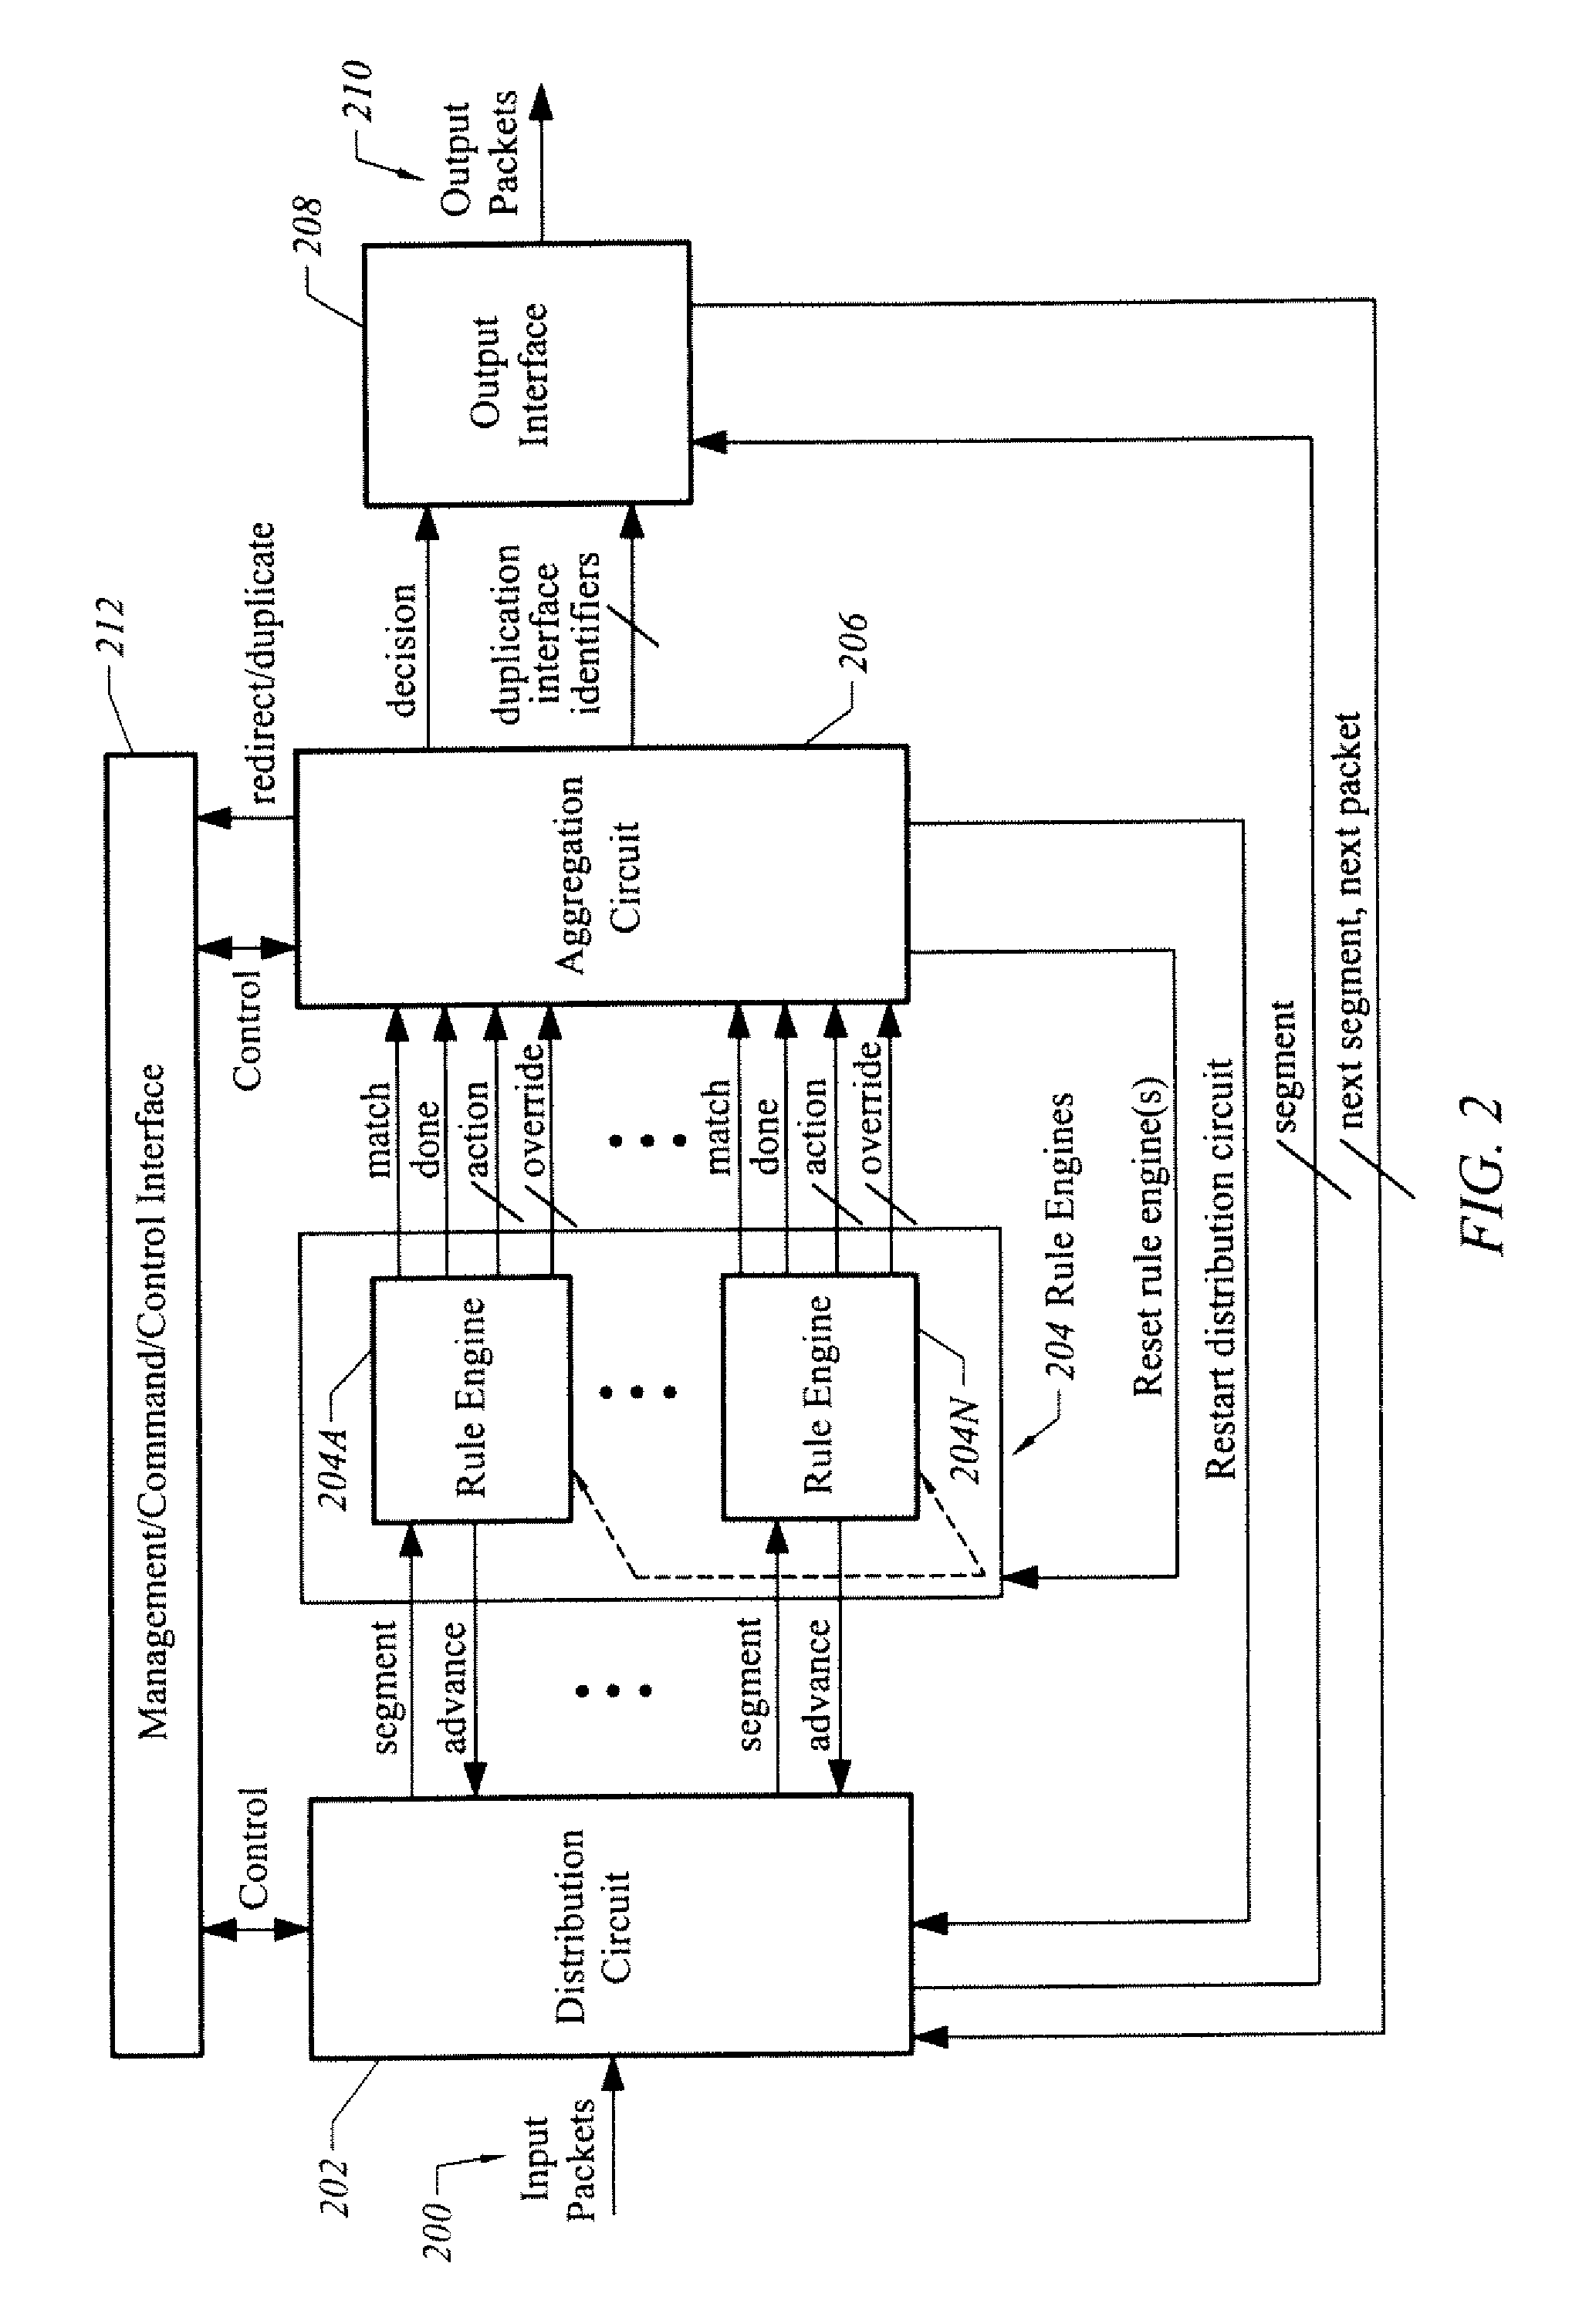 Apparatus and method for associating categorization information with network traffic to facilitate application level processing